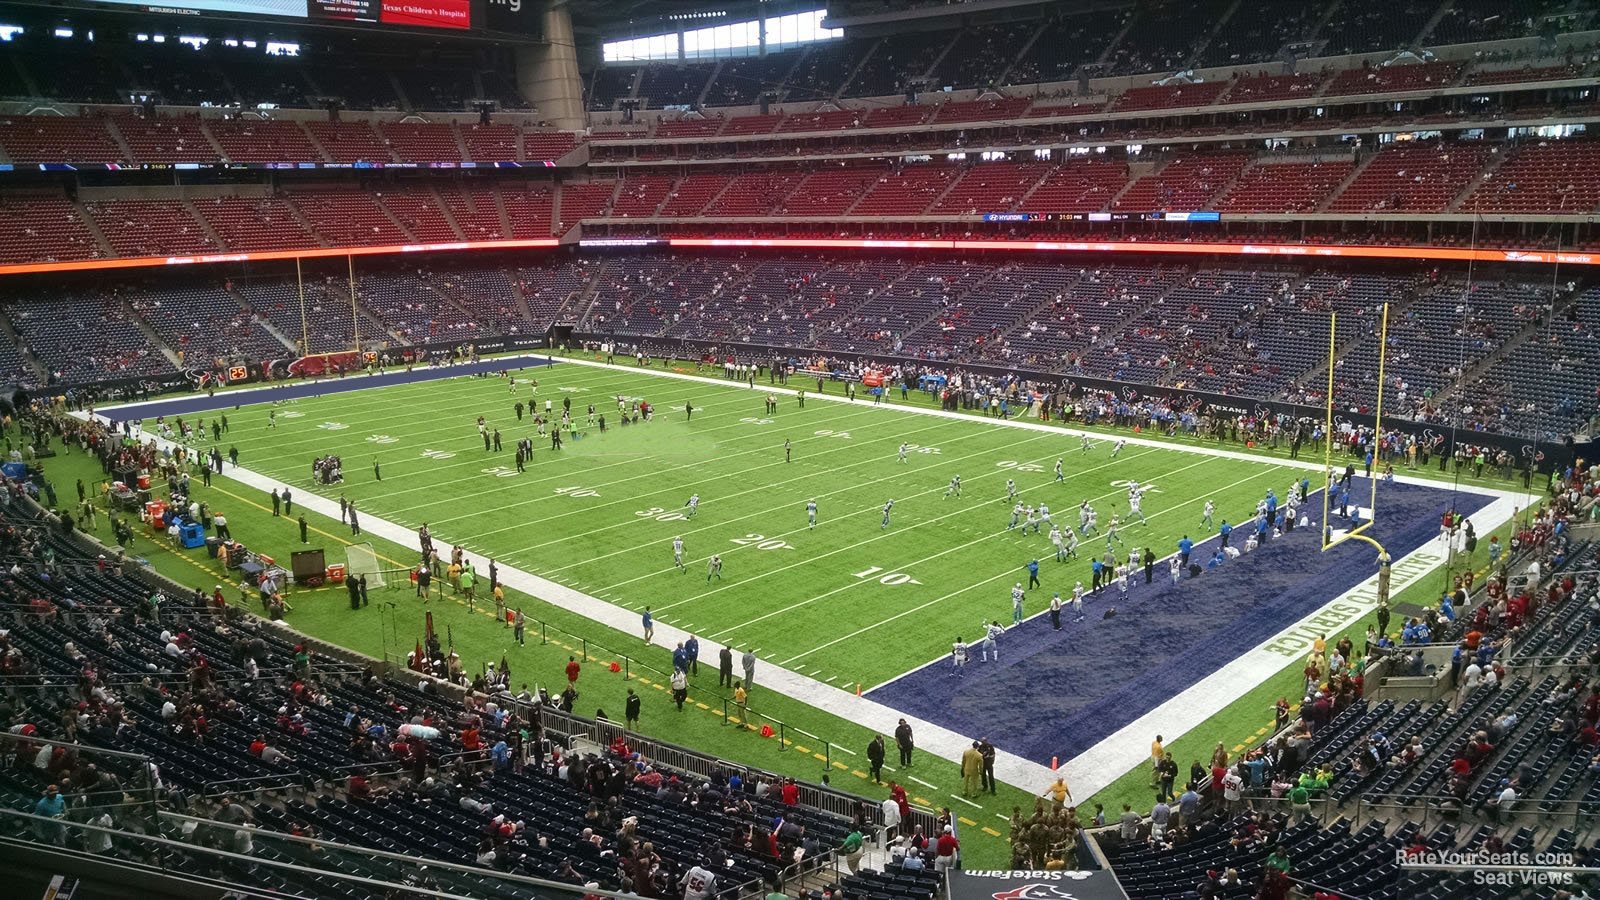 section 303, row l seat view  for football - nrg stadium